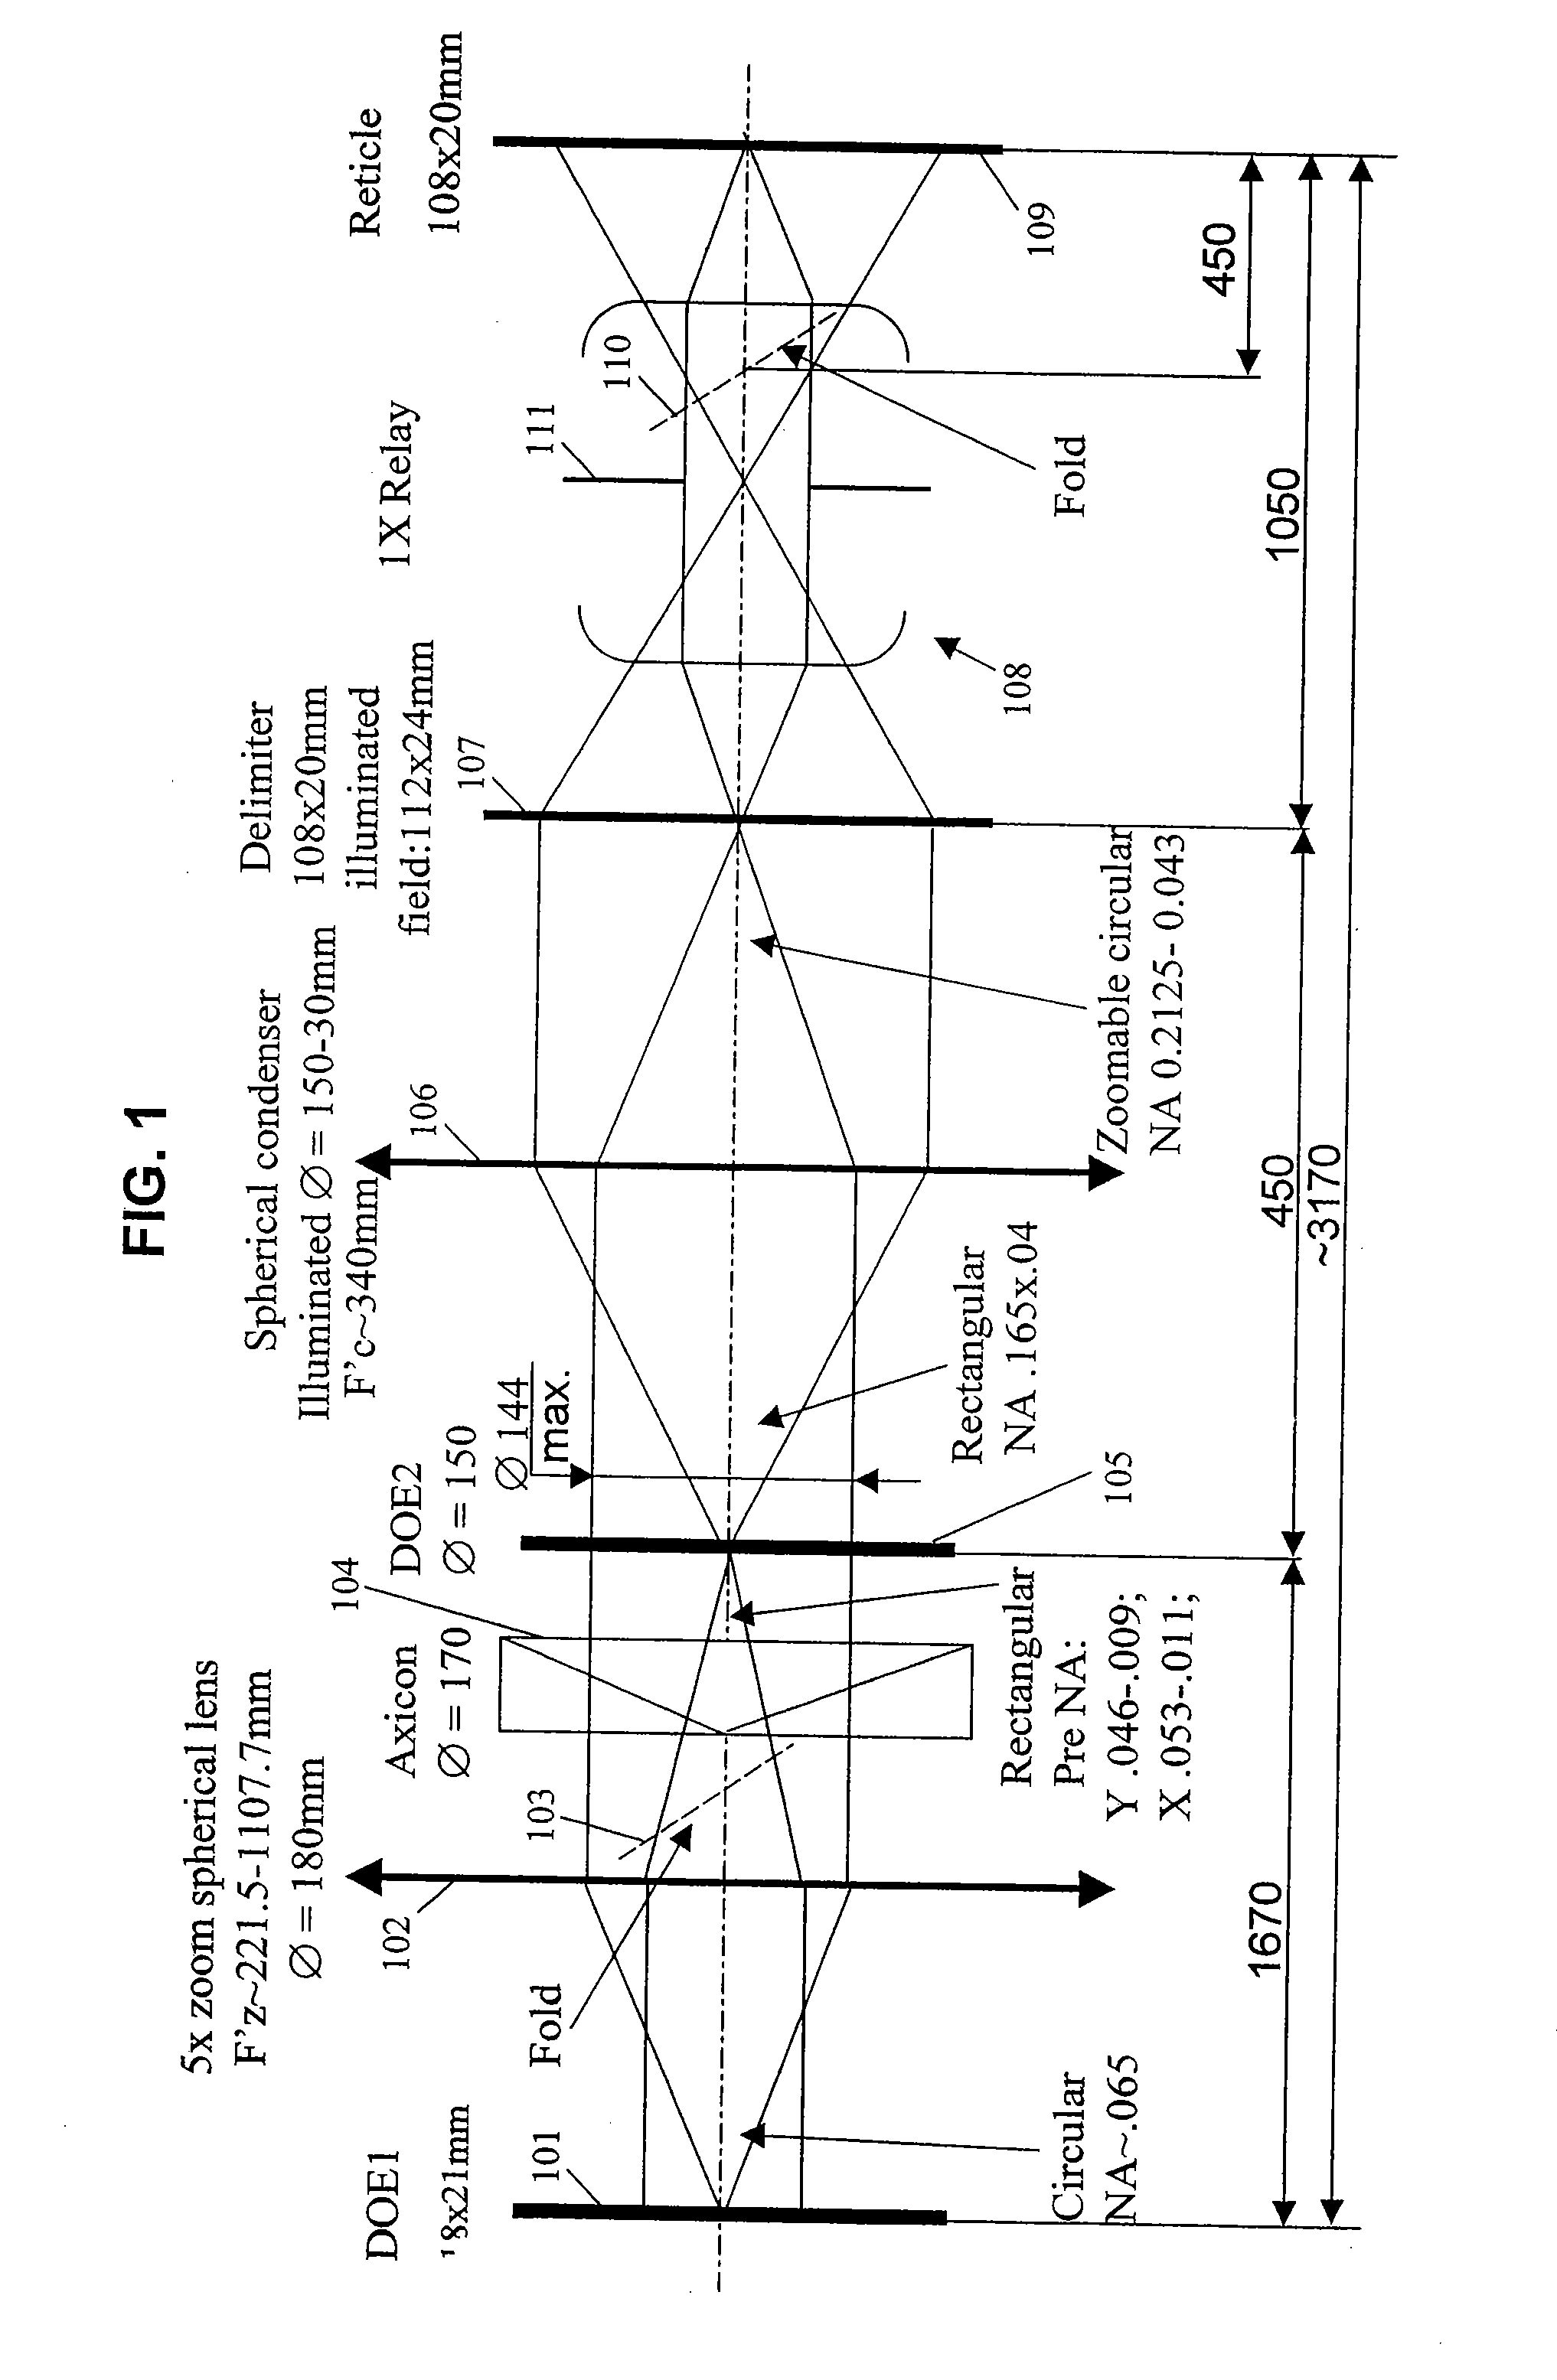 Advanced Illumination System for Use in Microlithography